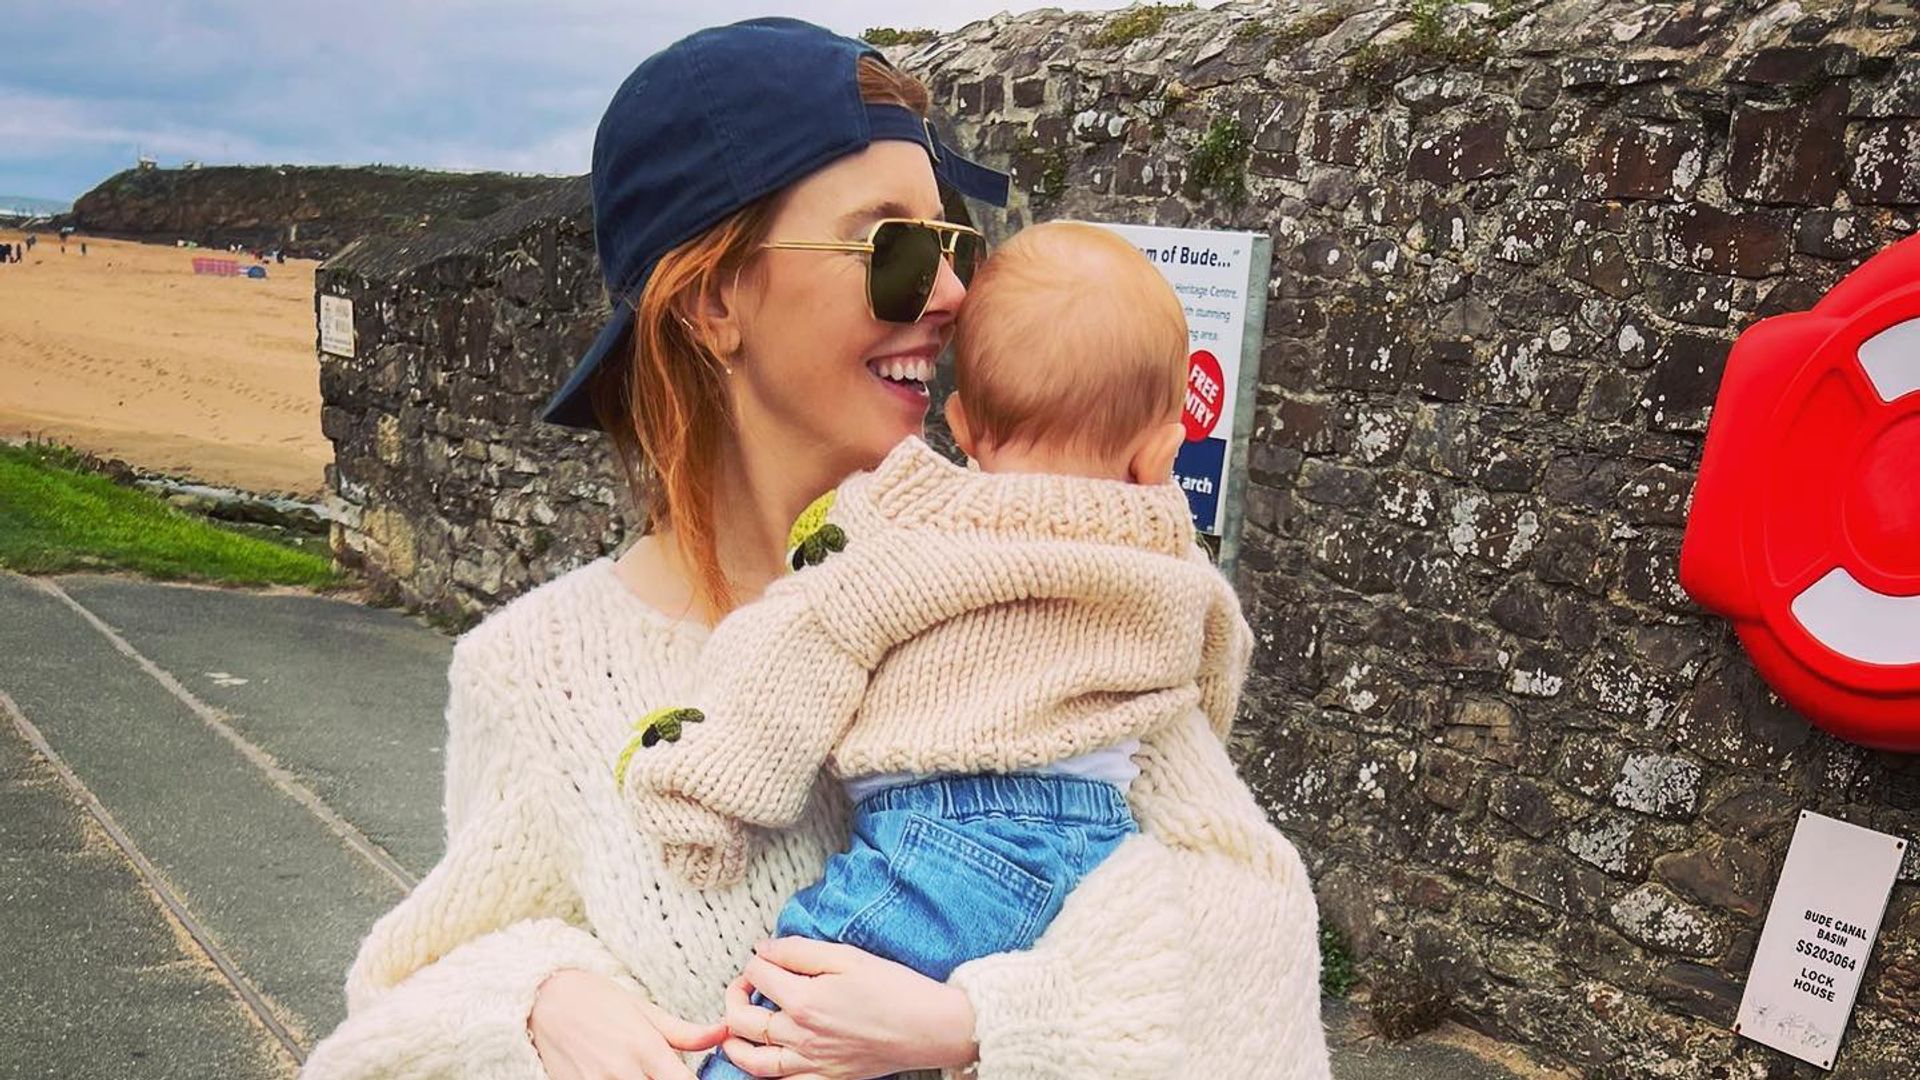 Stacey Dooley's daughter Minnie is her mini-me in edgy outfit for candid at-home photo